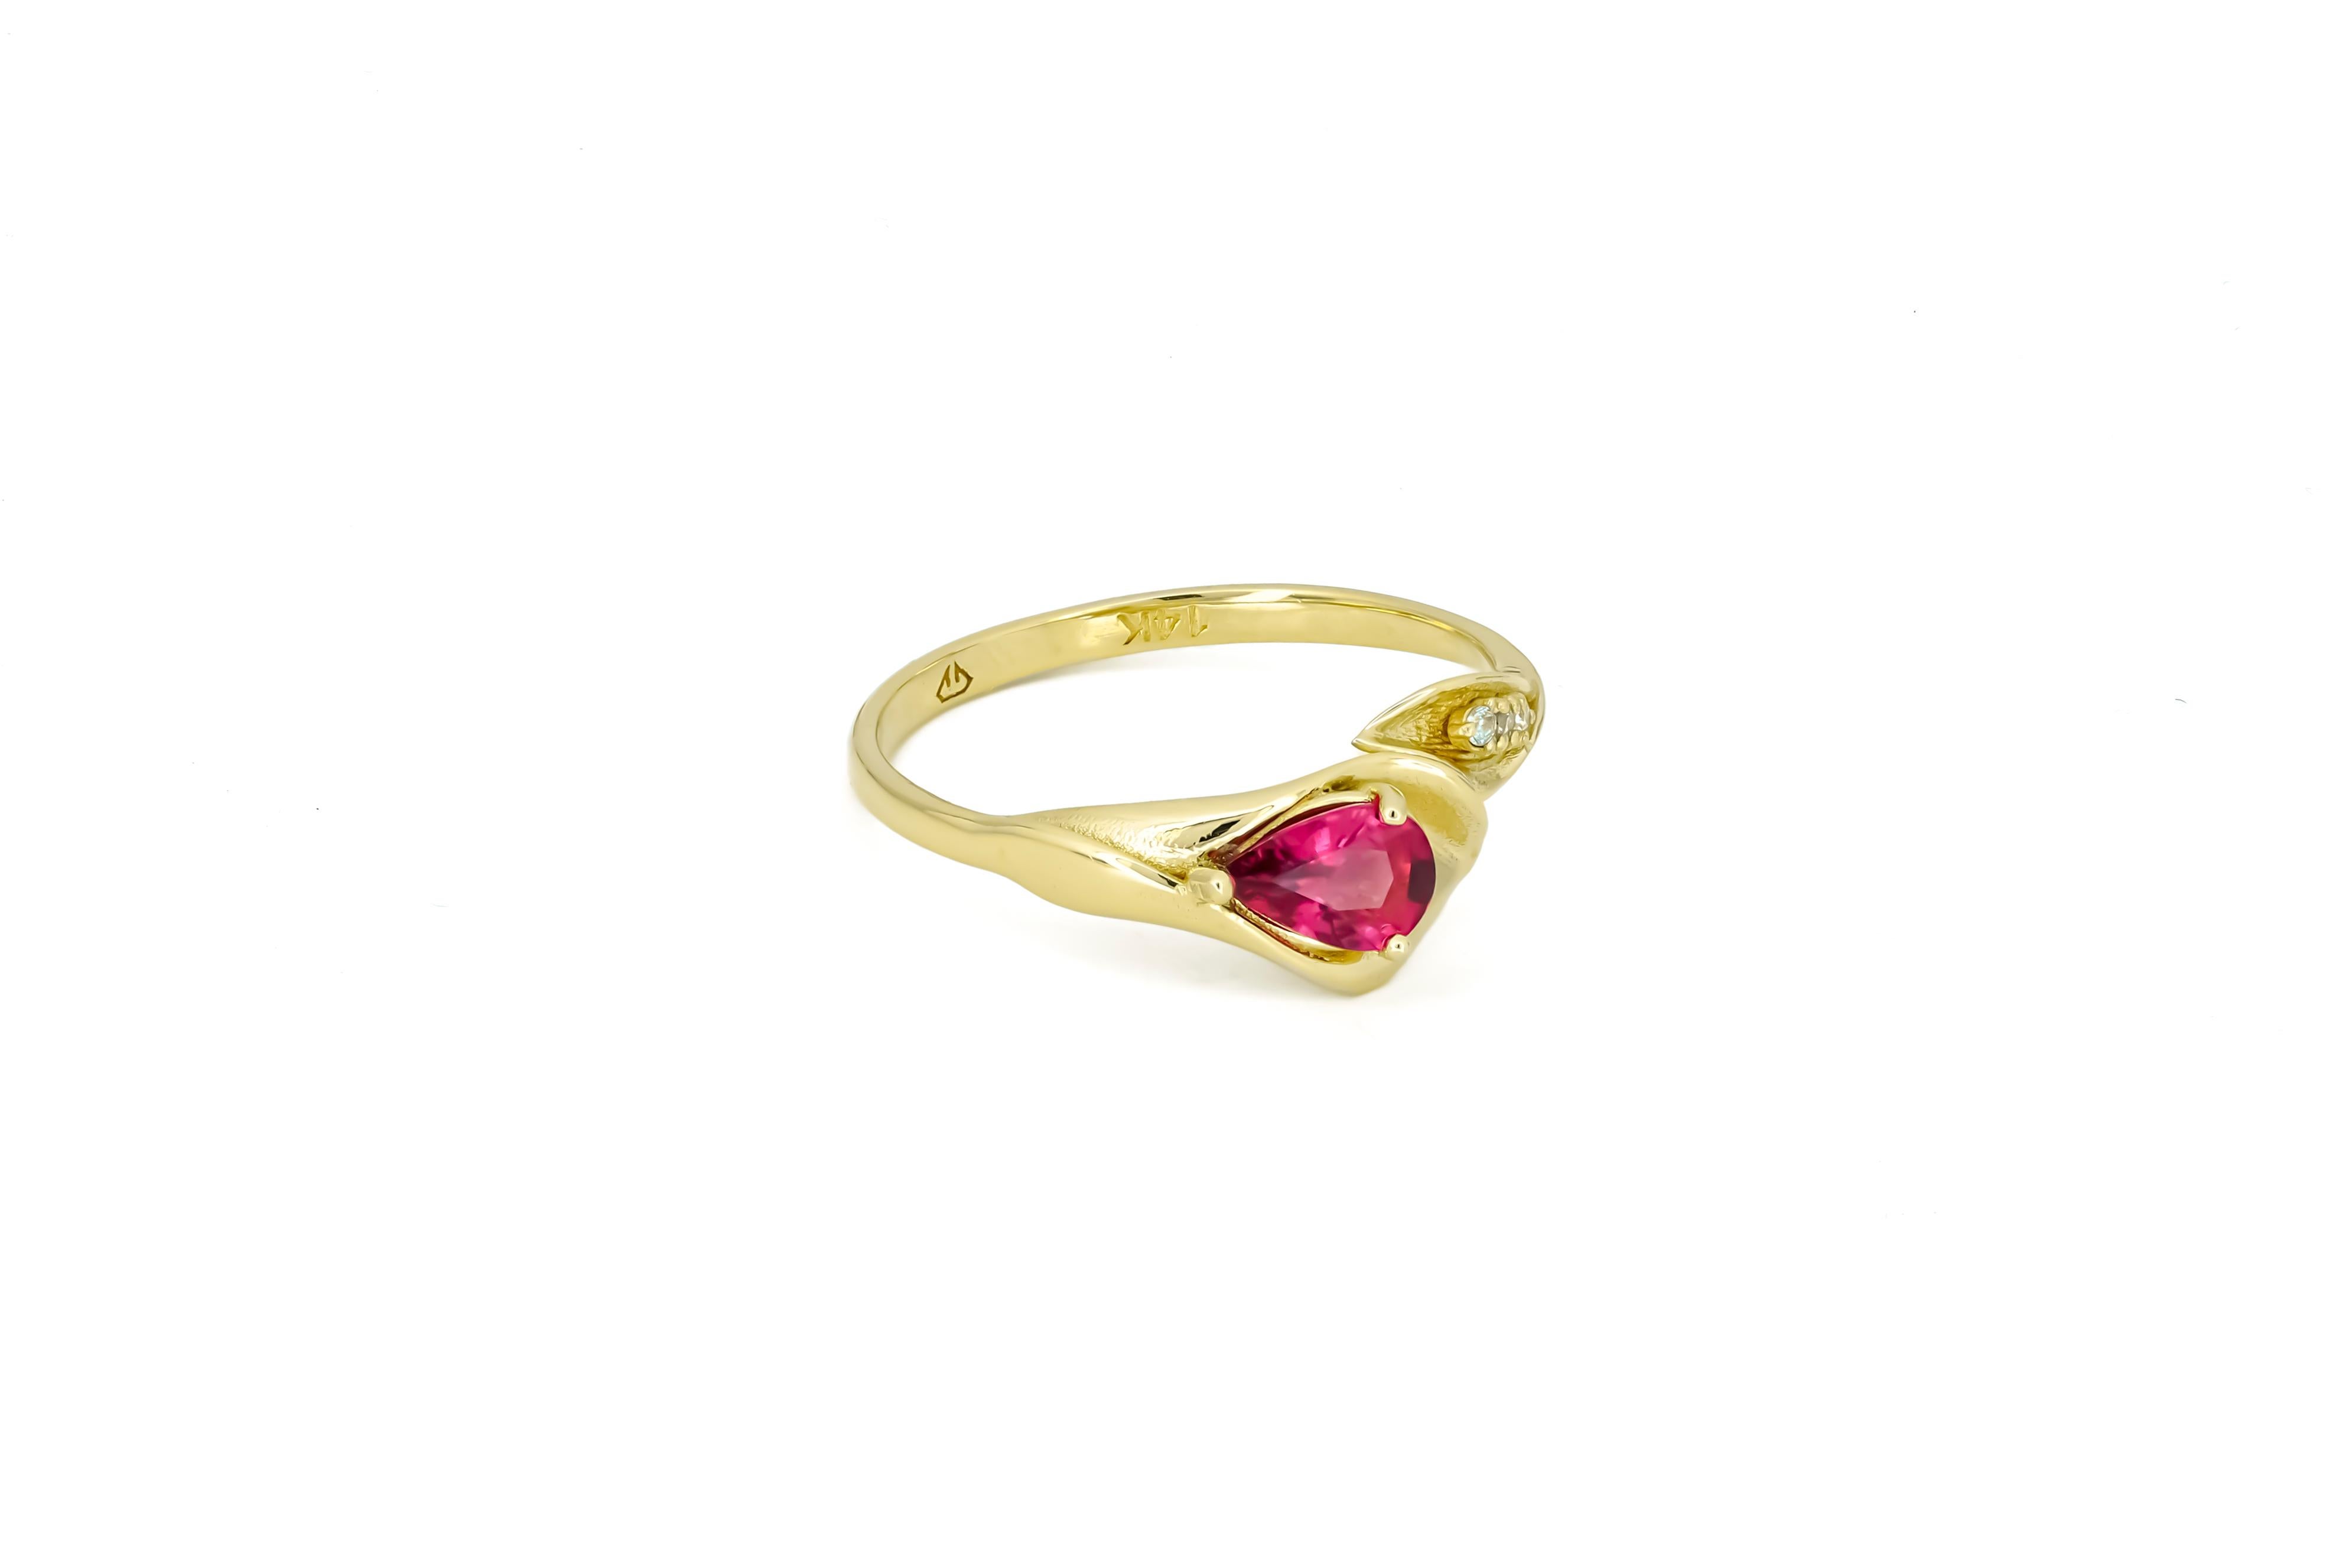 Lily Calla Gold Ring, 14 Karat Gold Ring with Garnet and Diamonds For Sale 6